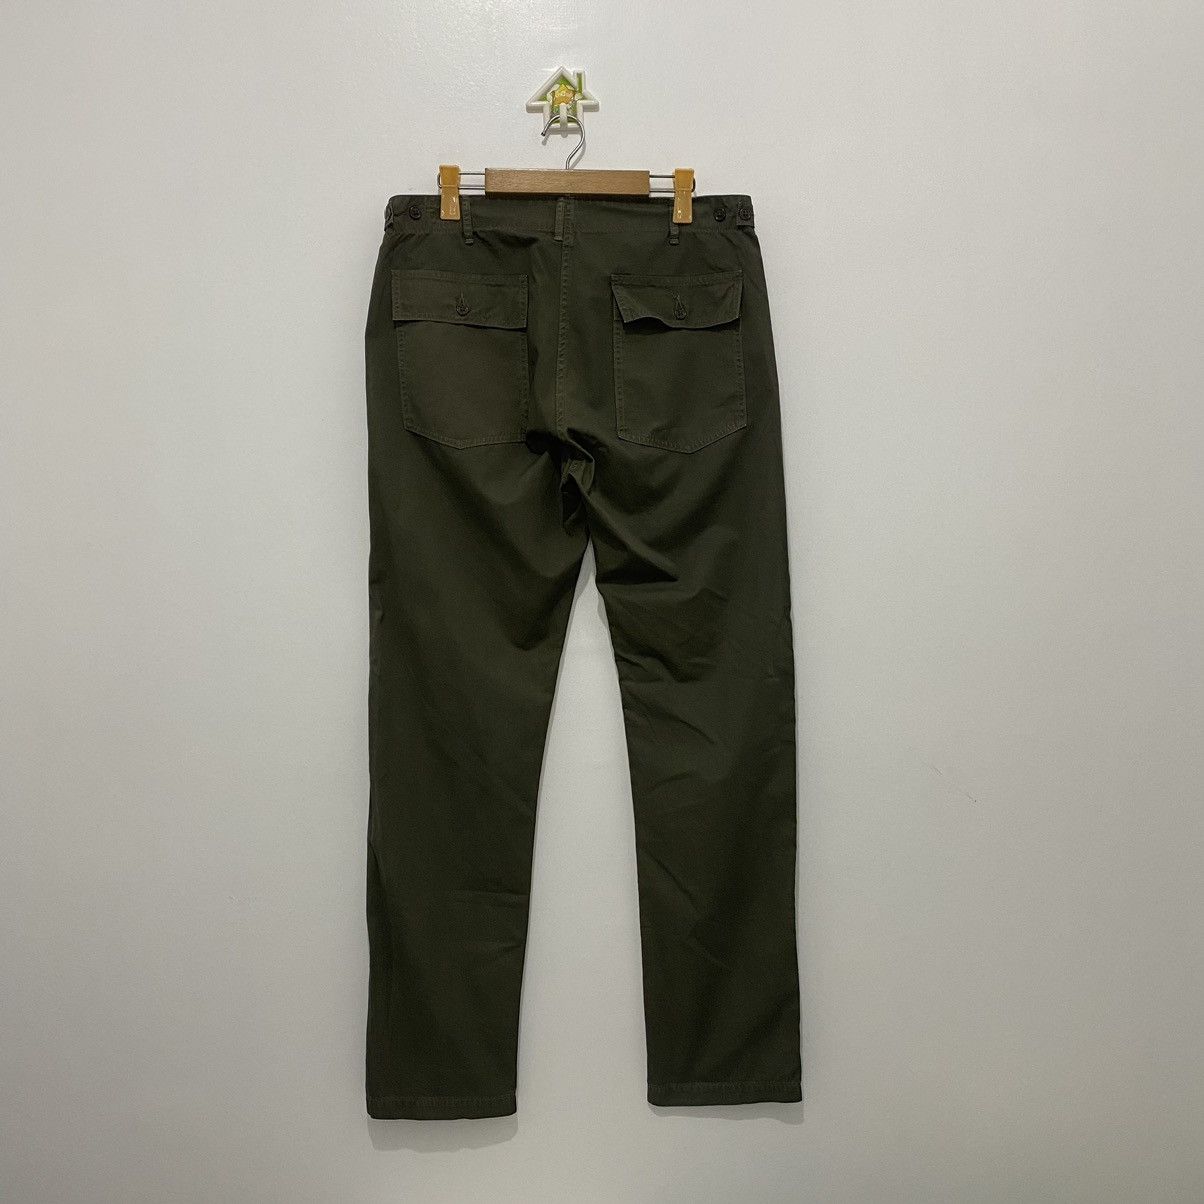 Orslow Orslow Fatigue Army Pants | Grailed